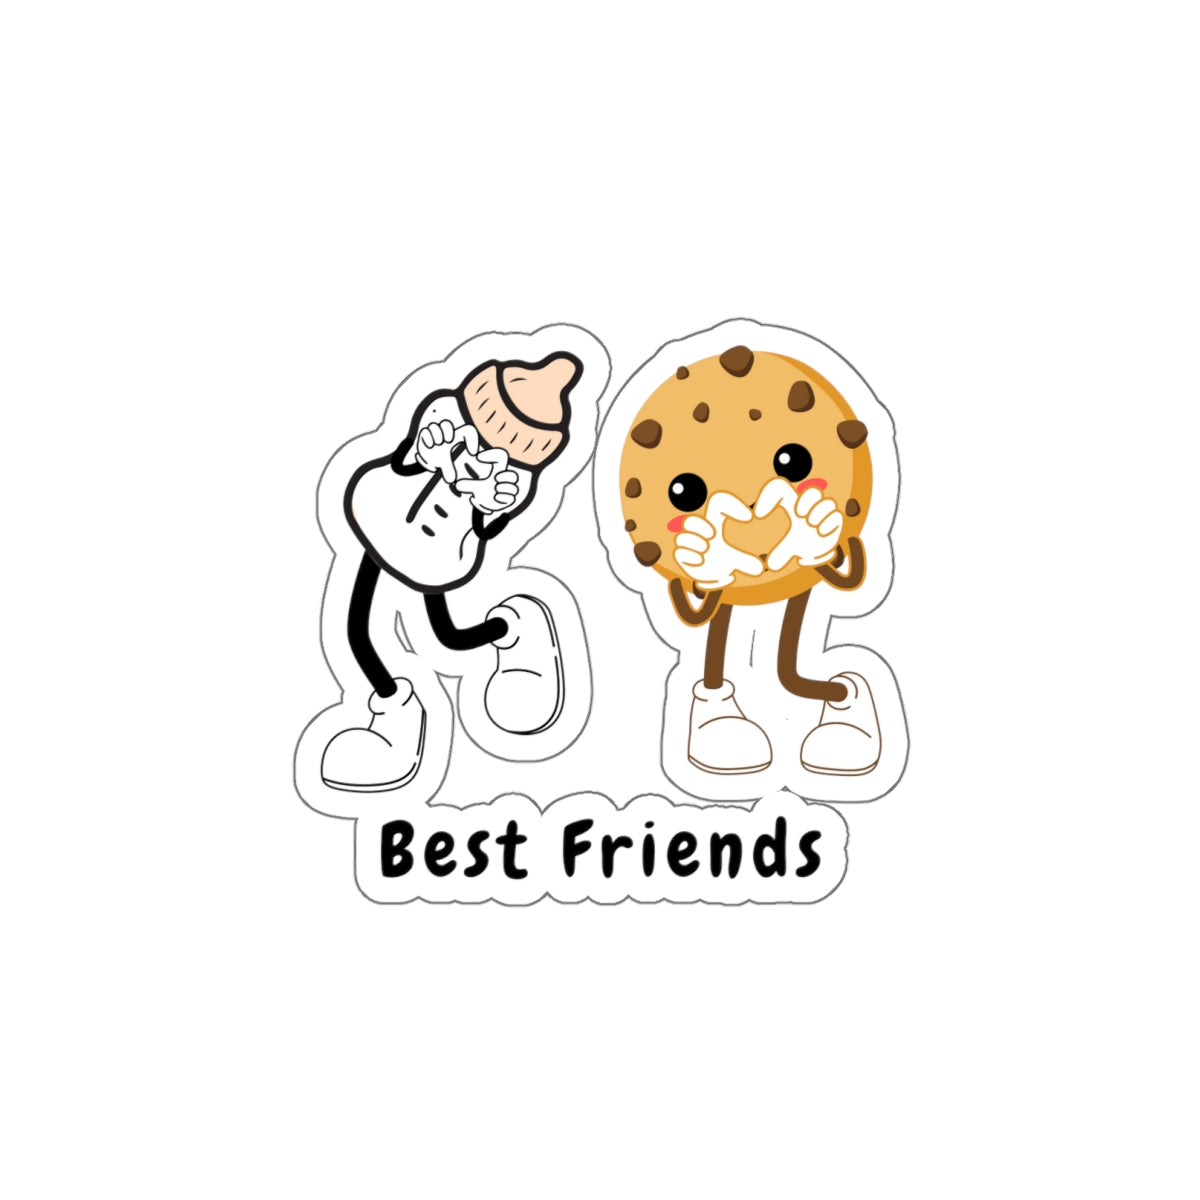 Best Friends Inspirational Quote Kiss-Cut Stickers-Paper products-6" × 6"-White-mysticalcherry